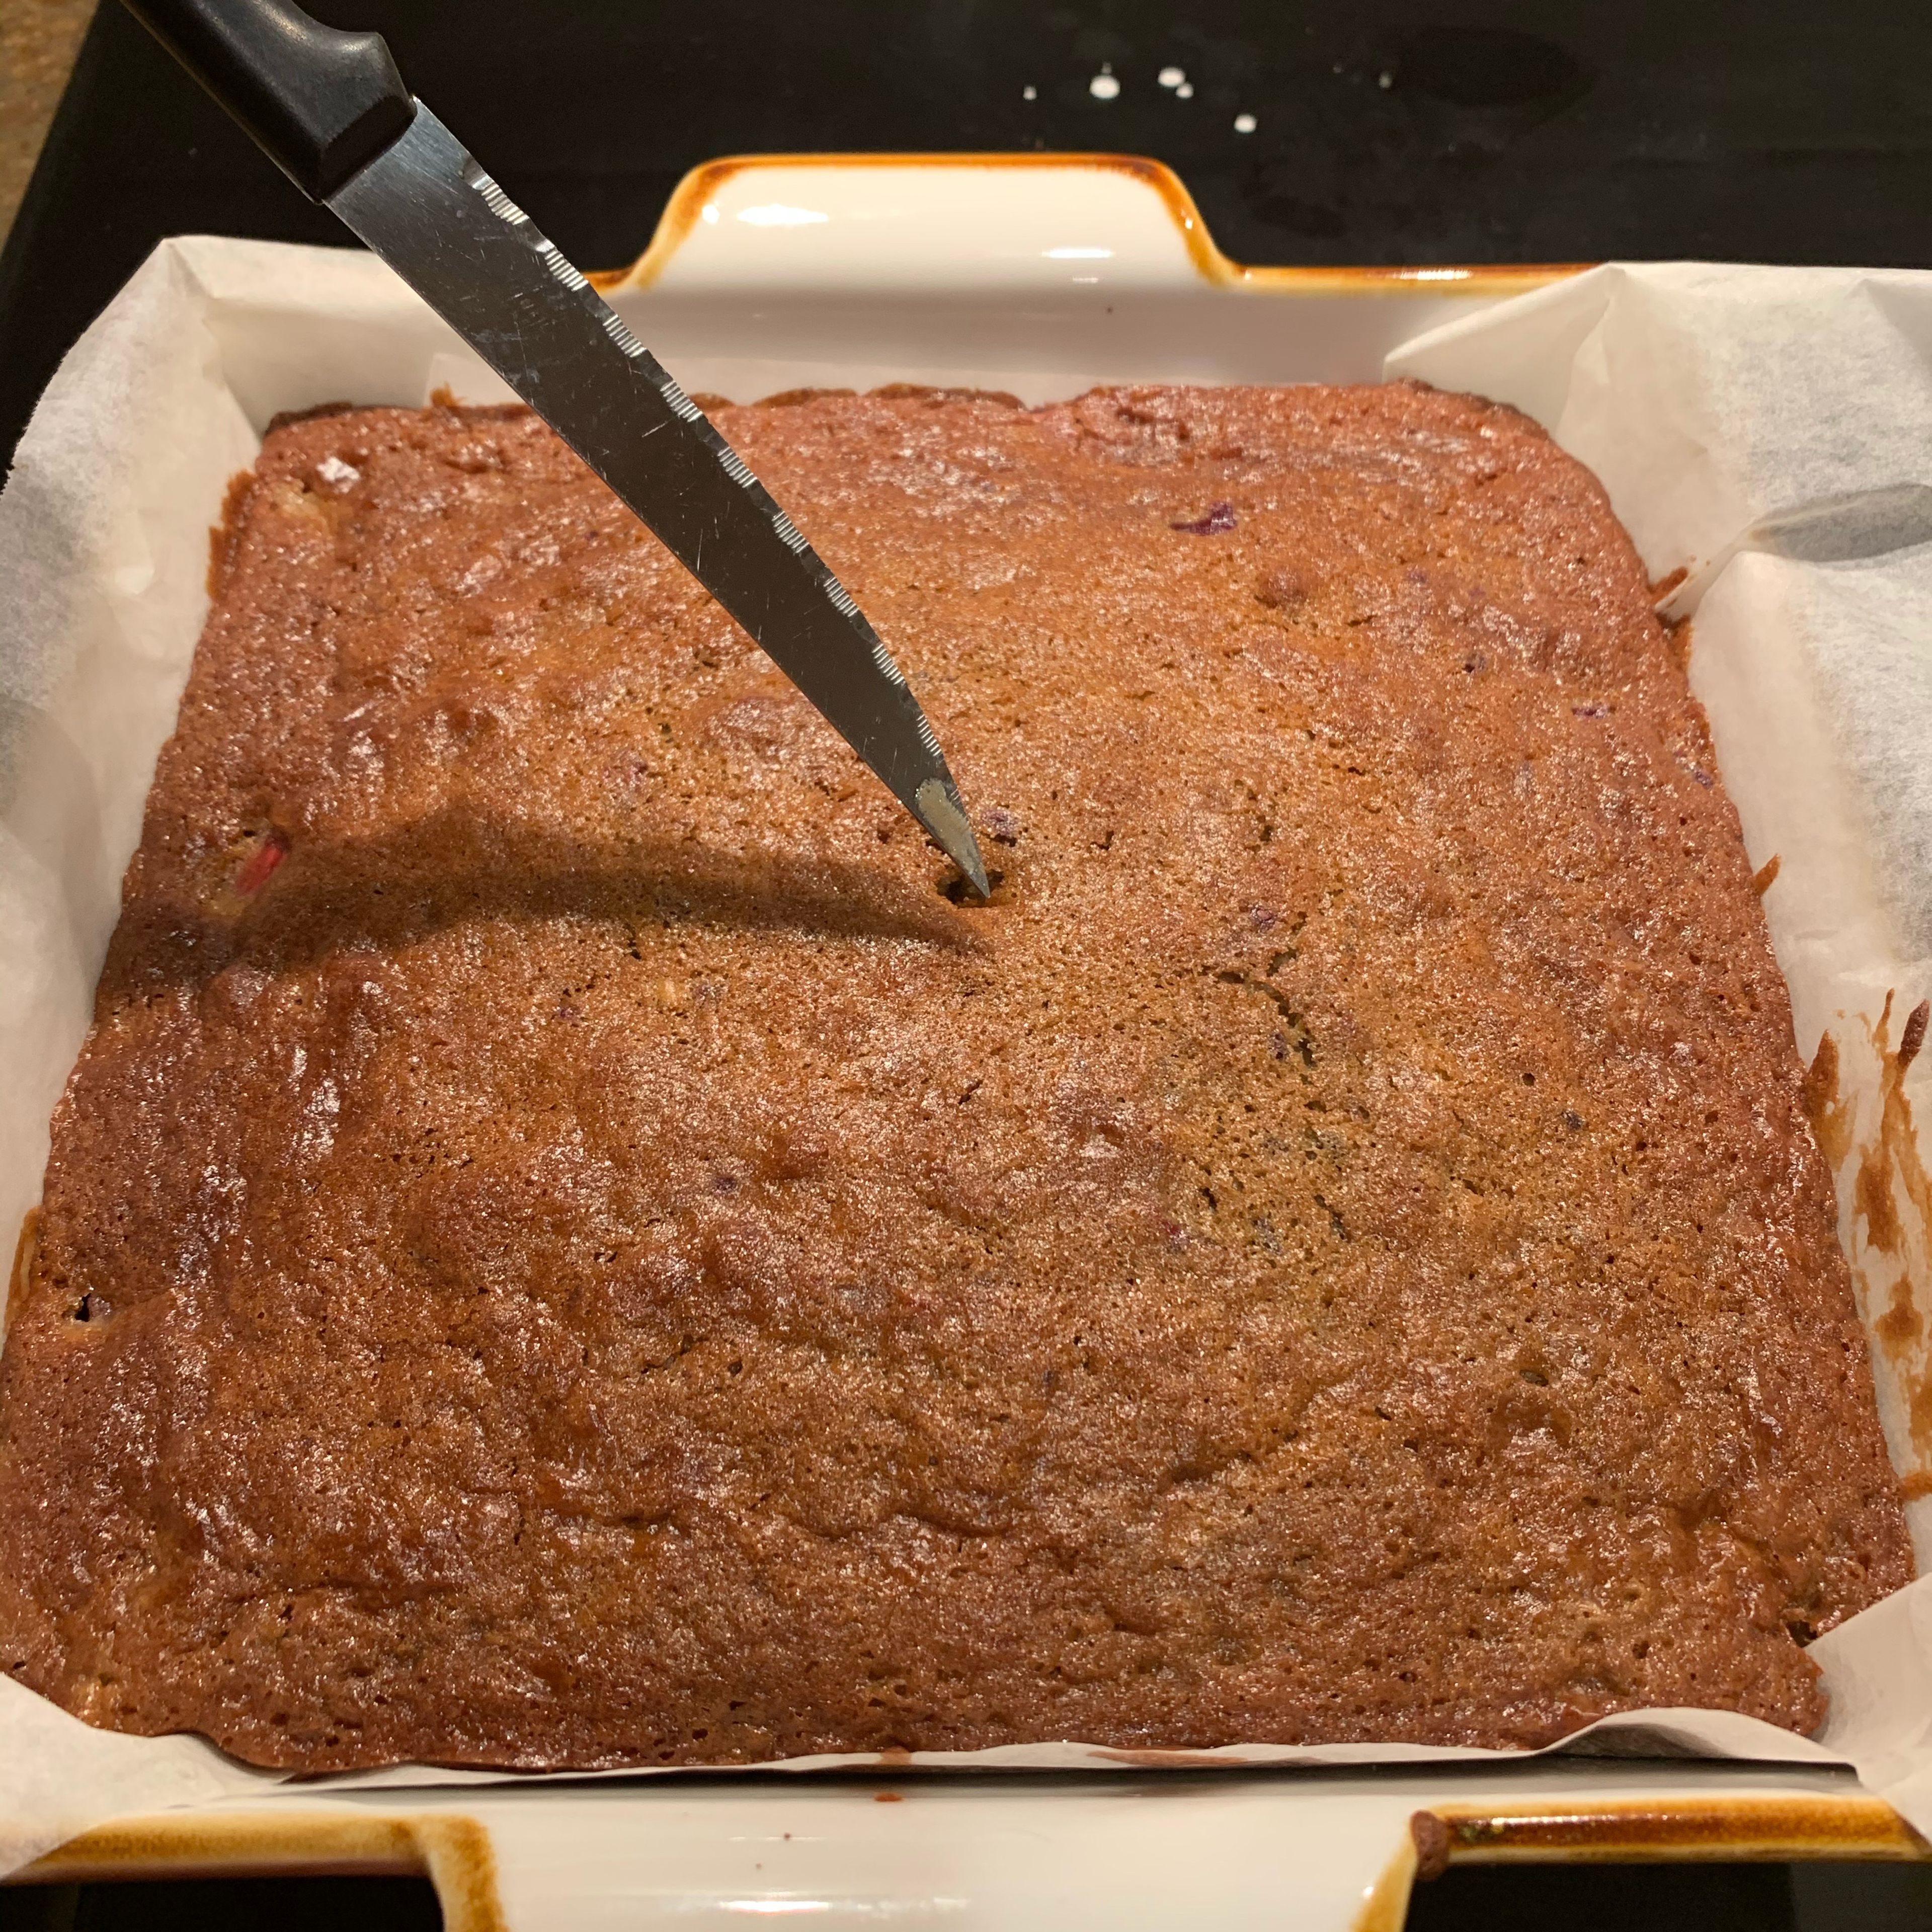 Bake for 40 - 45 mins in 180C oven. Centre should be soft (but not sloppy), with a little bit of mixture sticking to knife placed in middle.